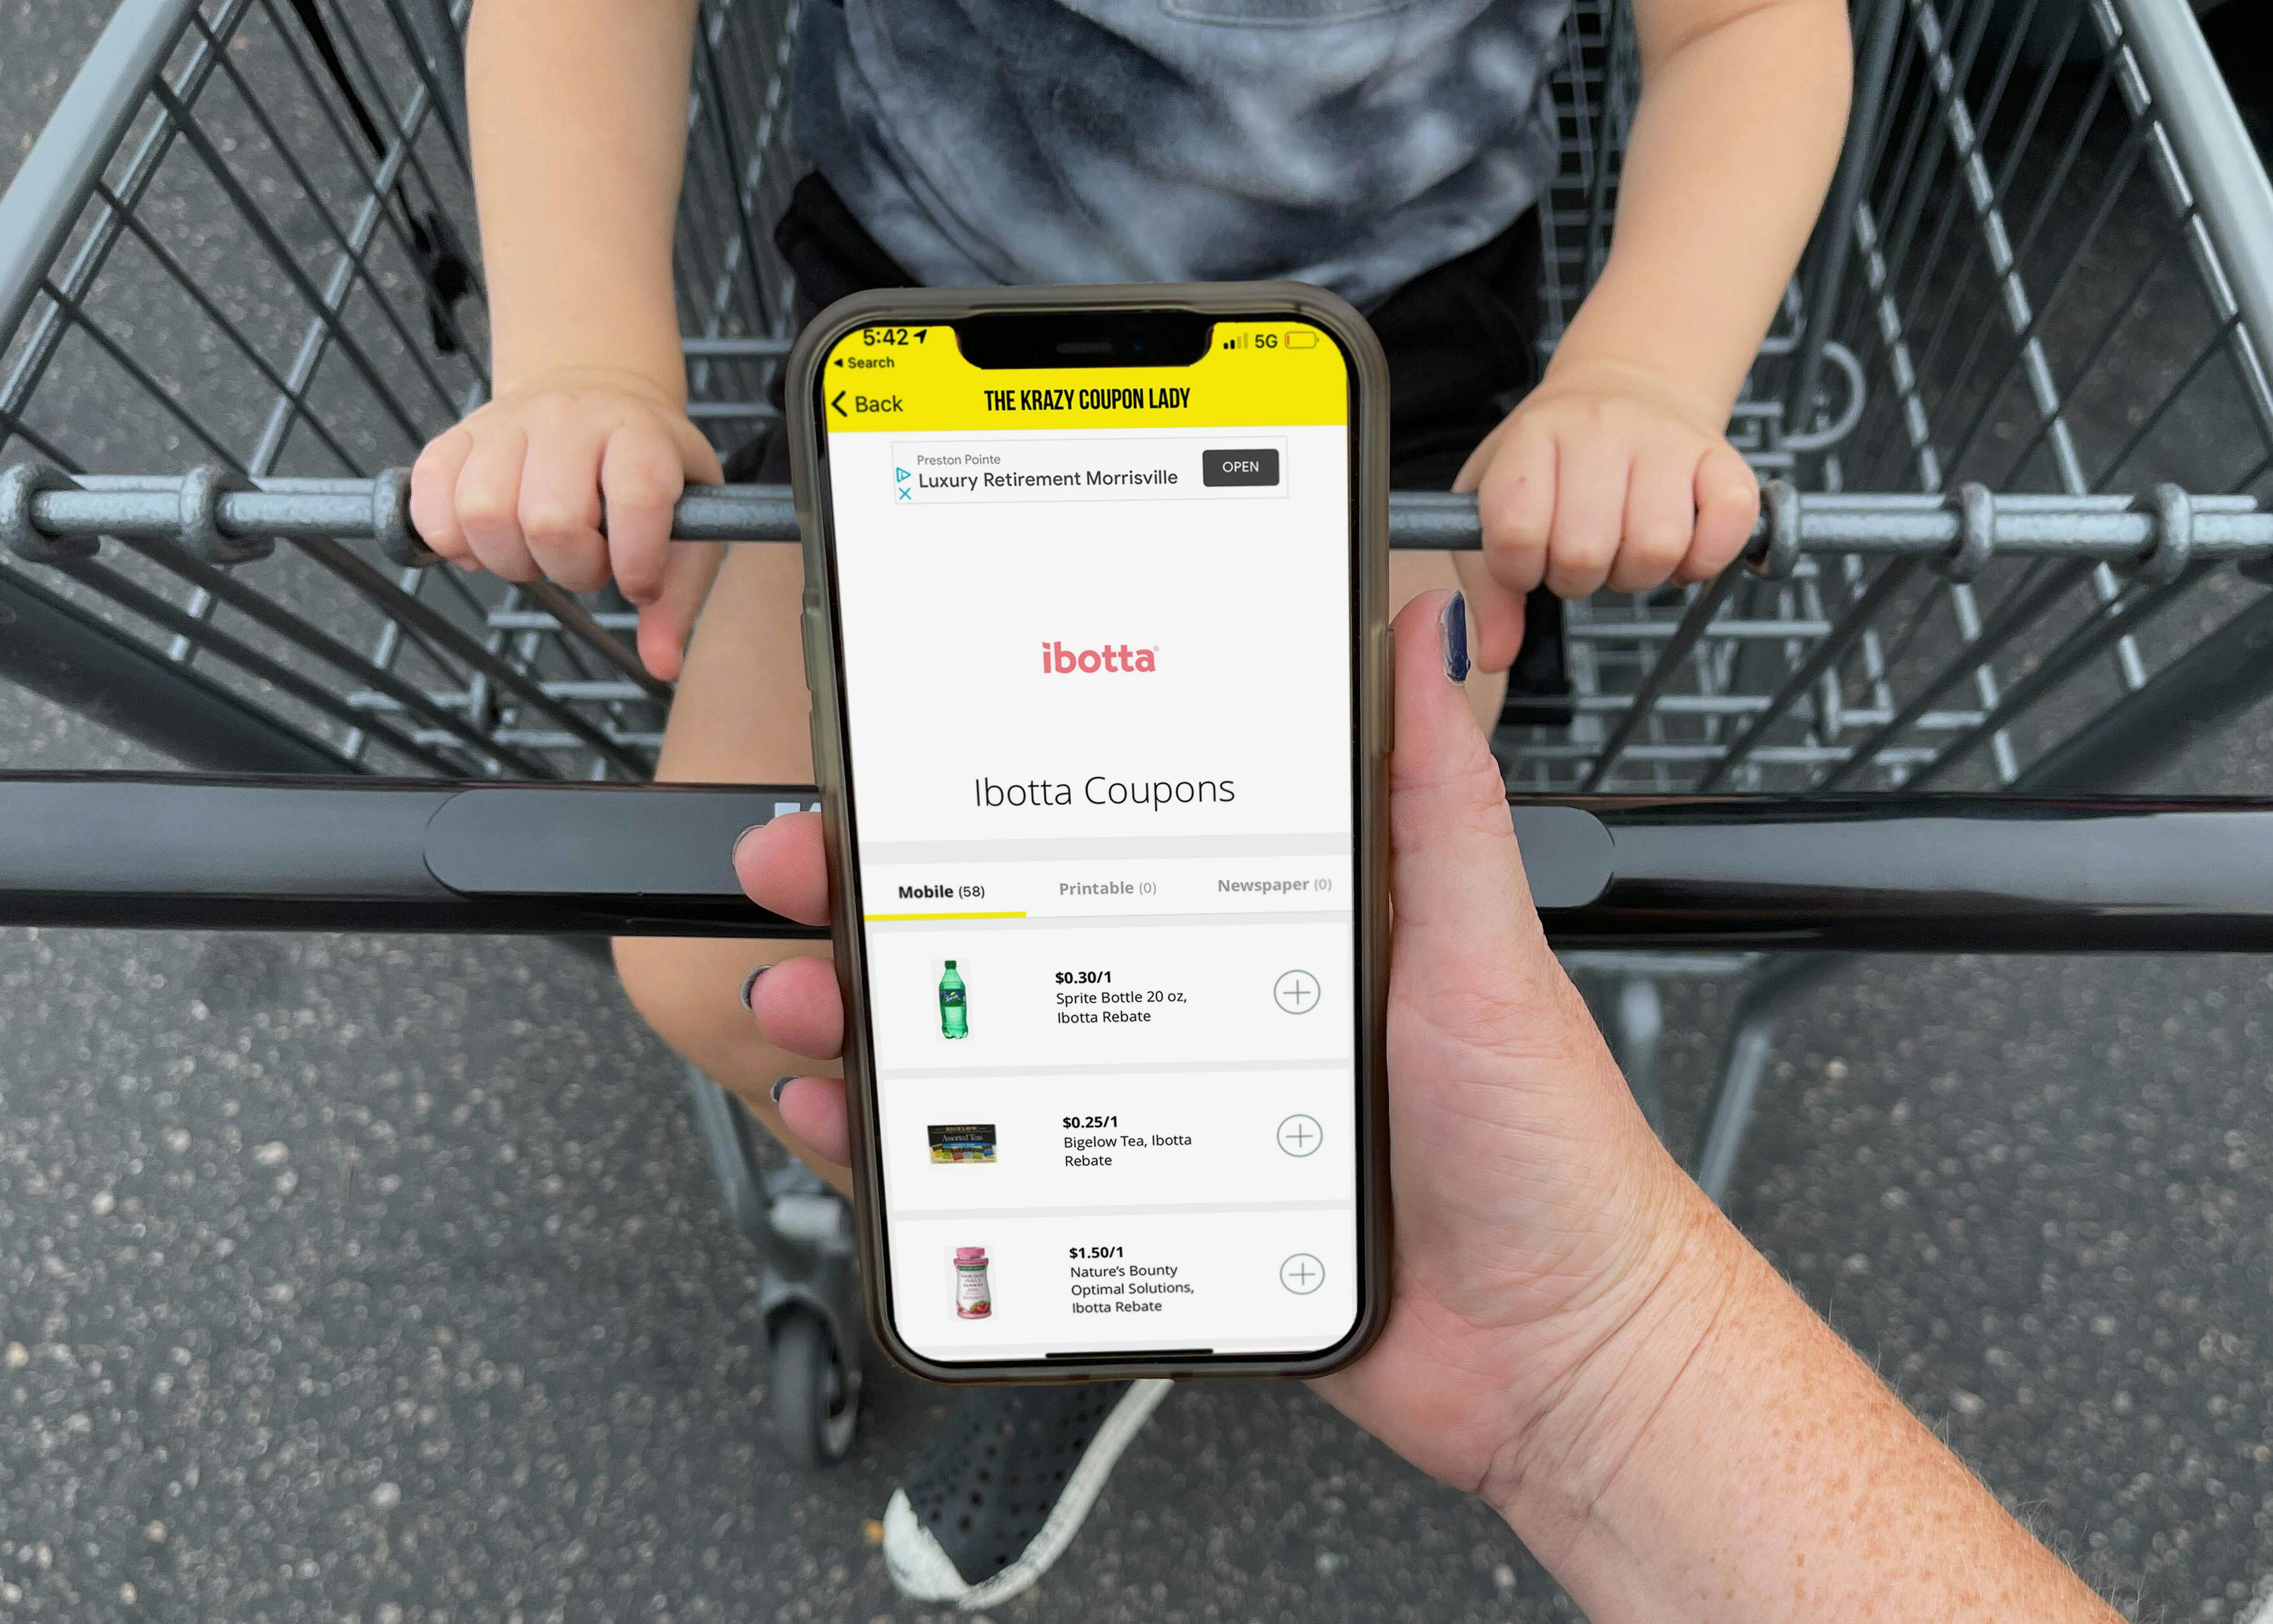 ibotta app being held in front of cart with child